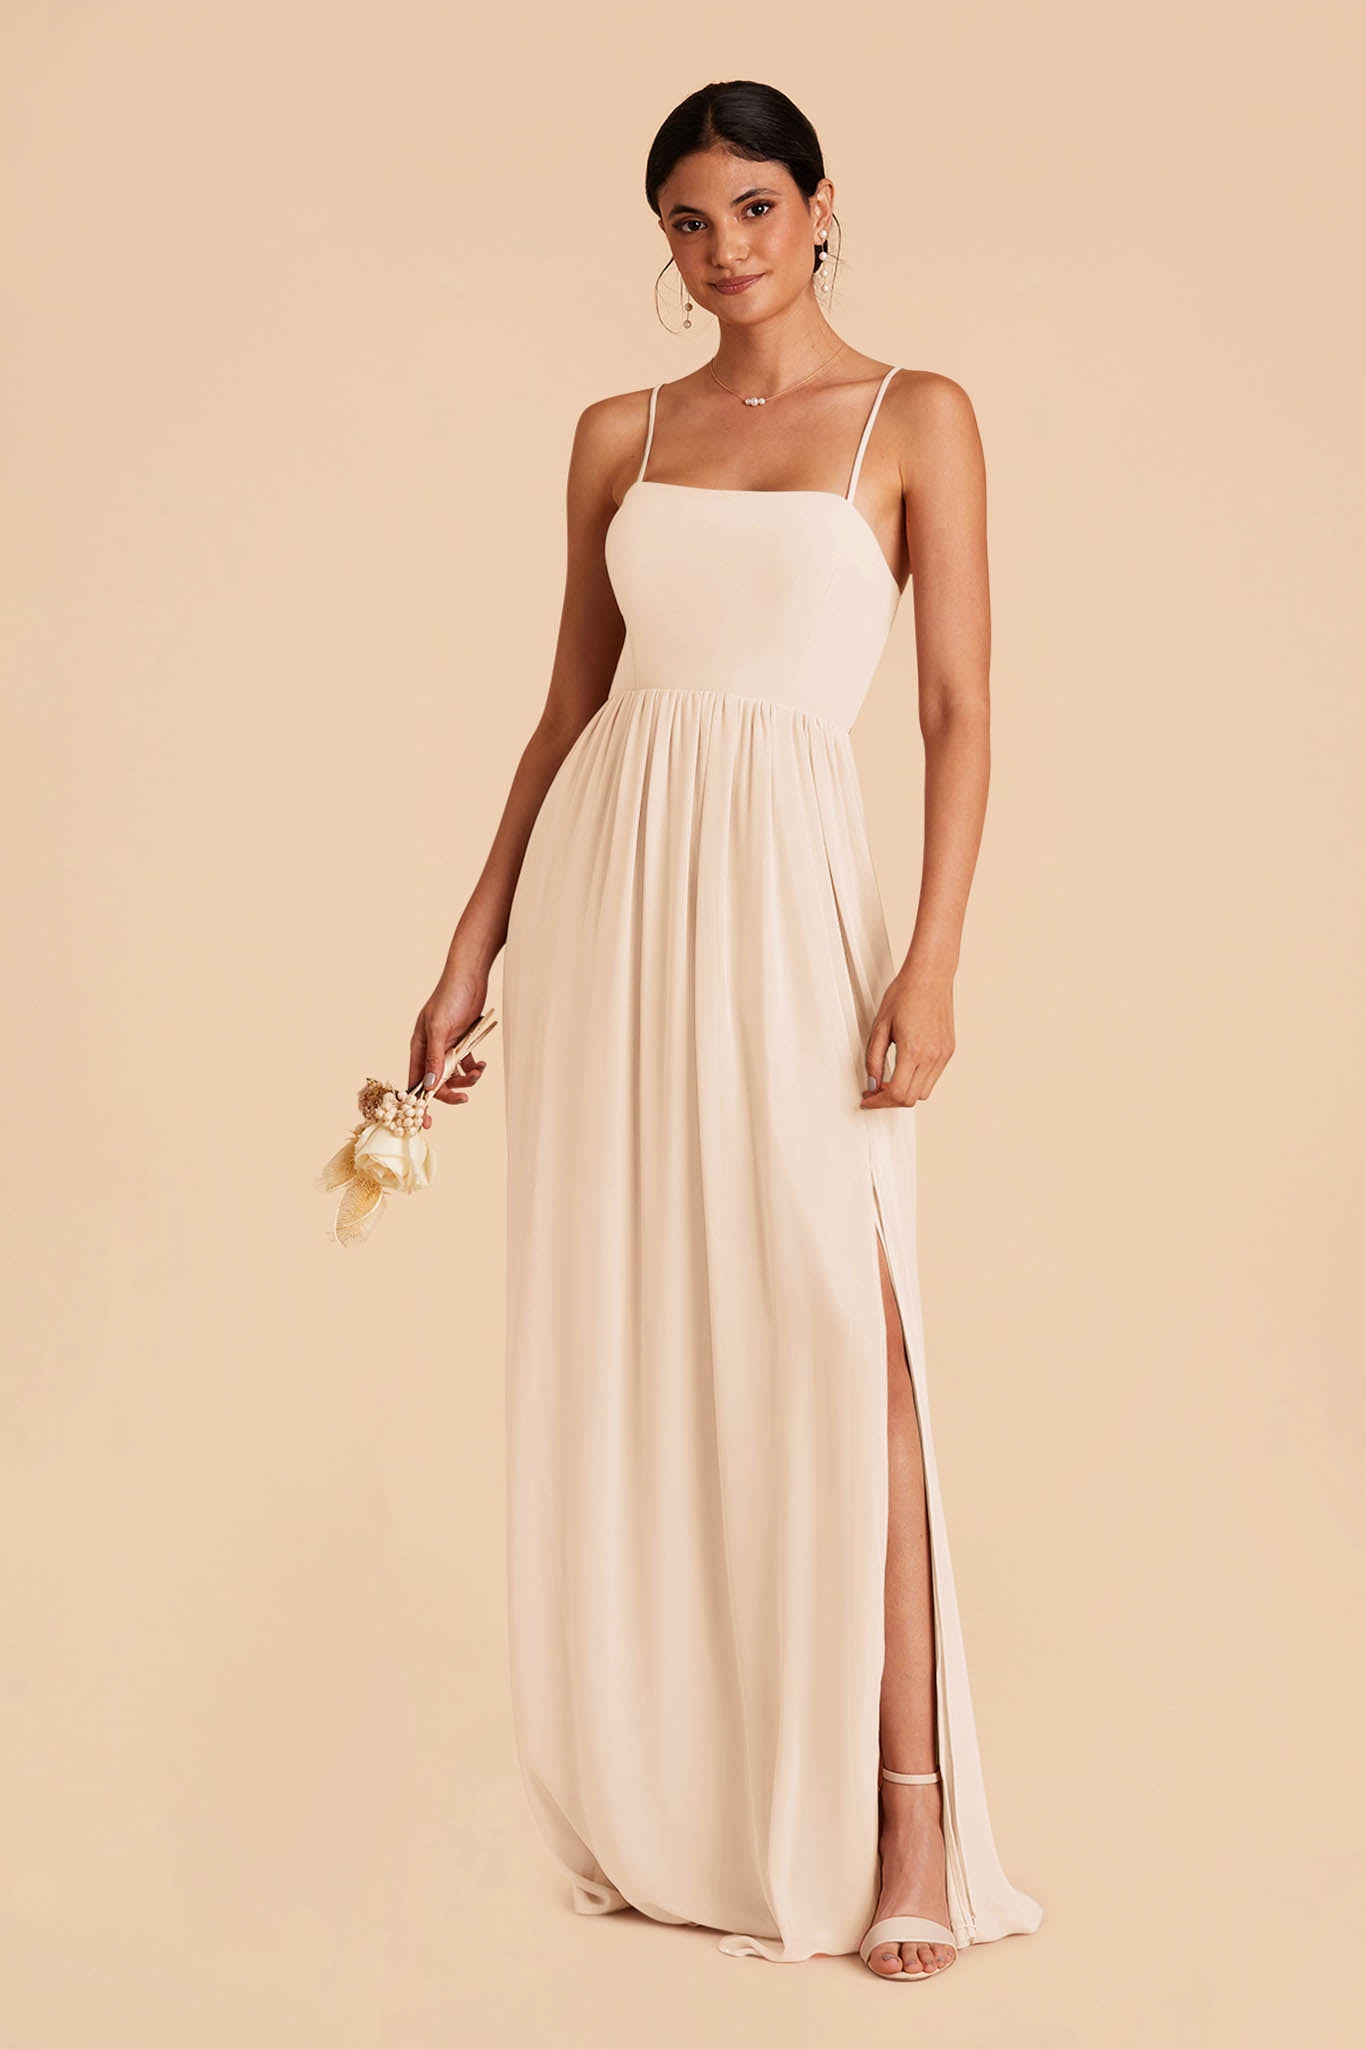 Champagne August Convertible Dress by Birdy Grey